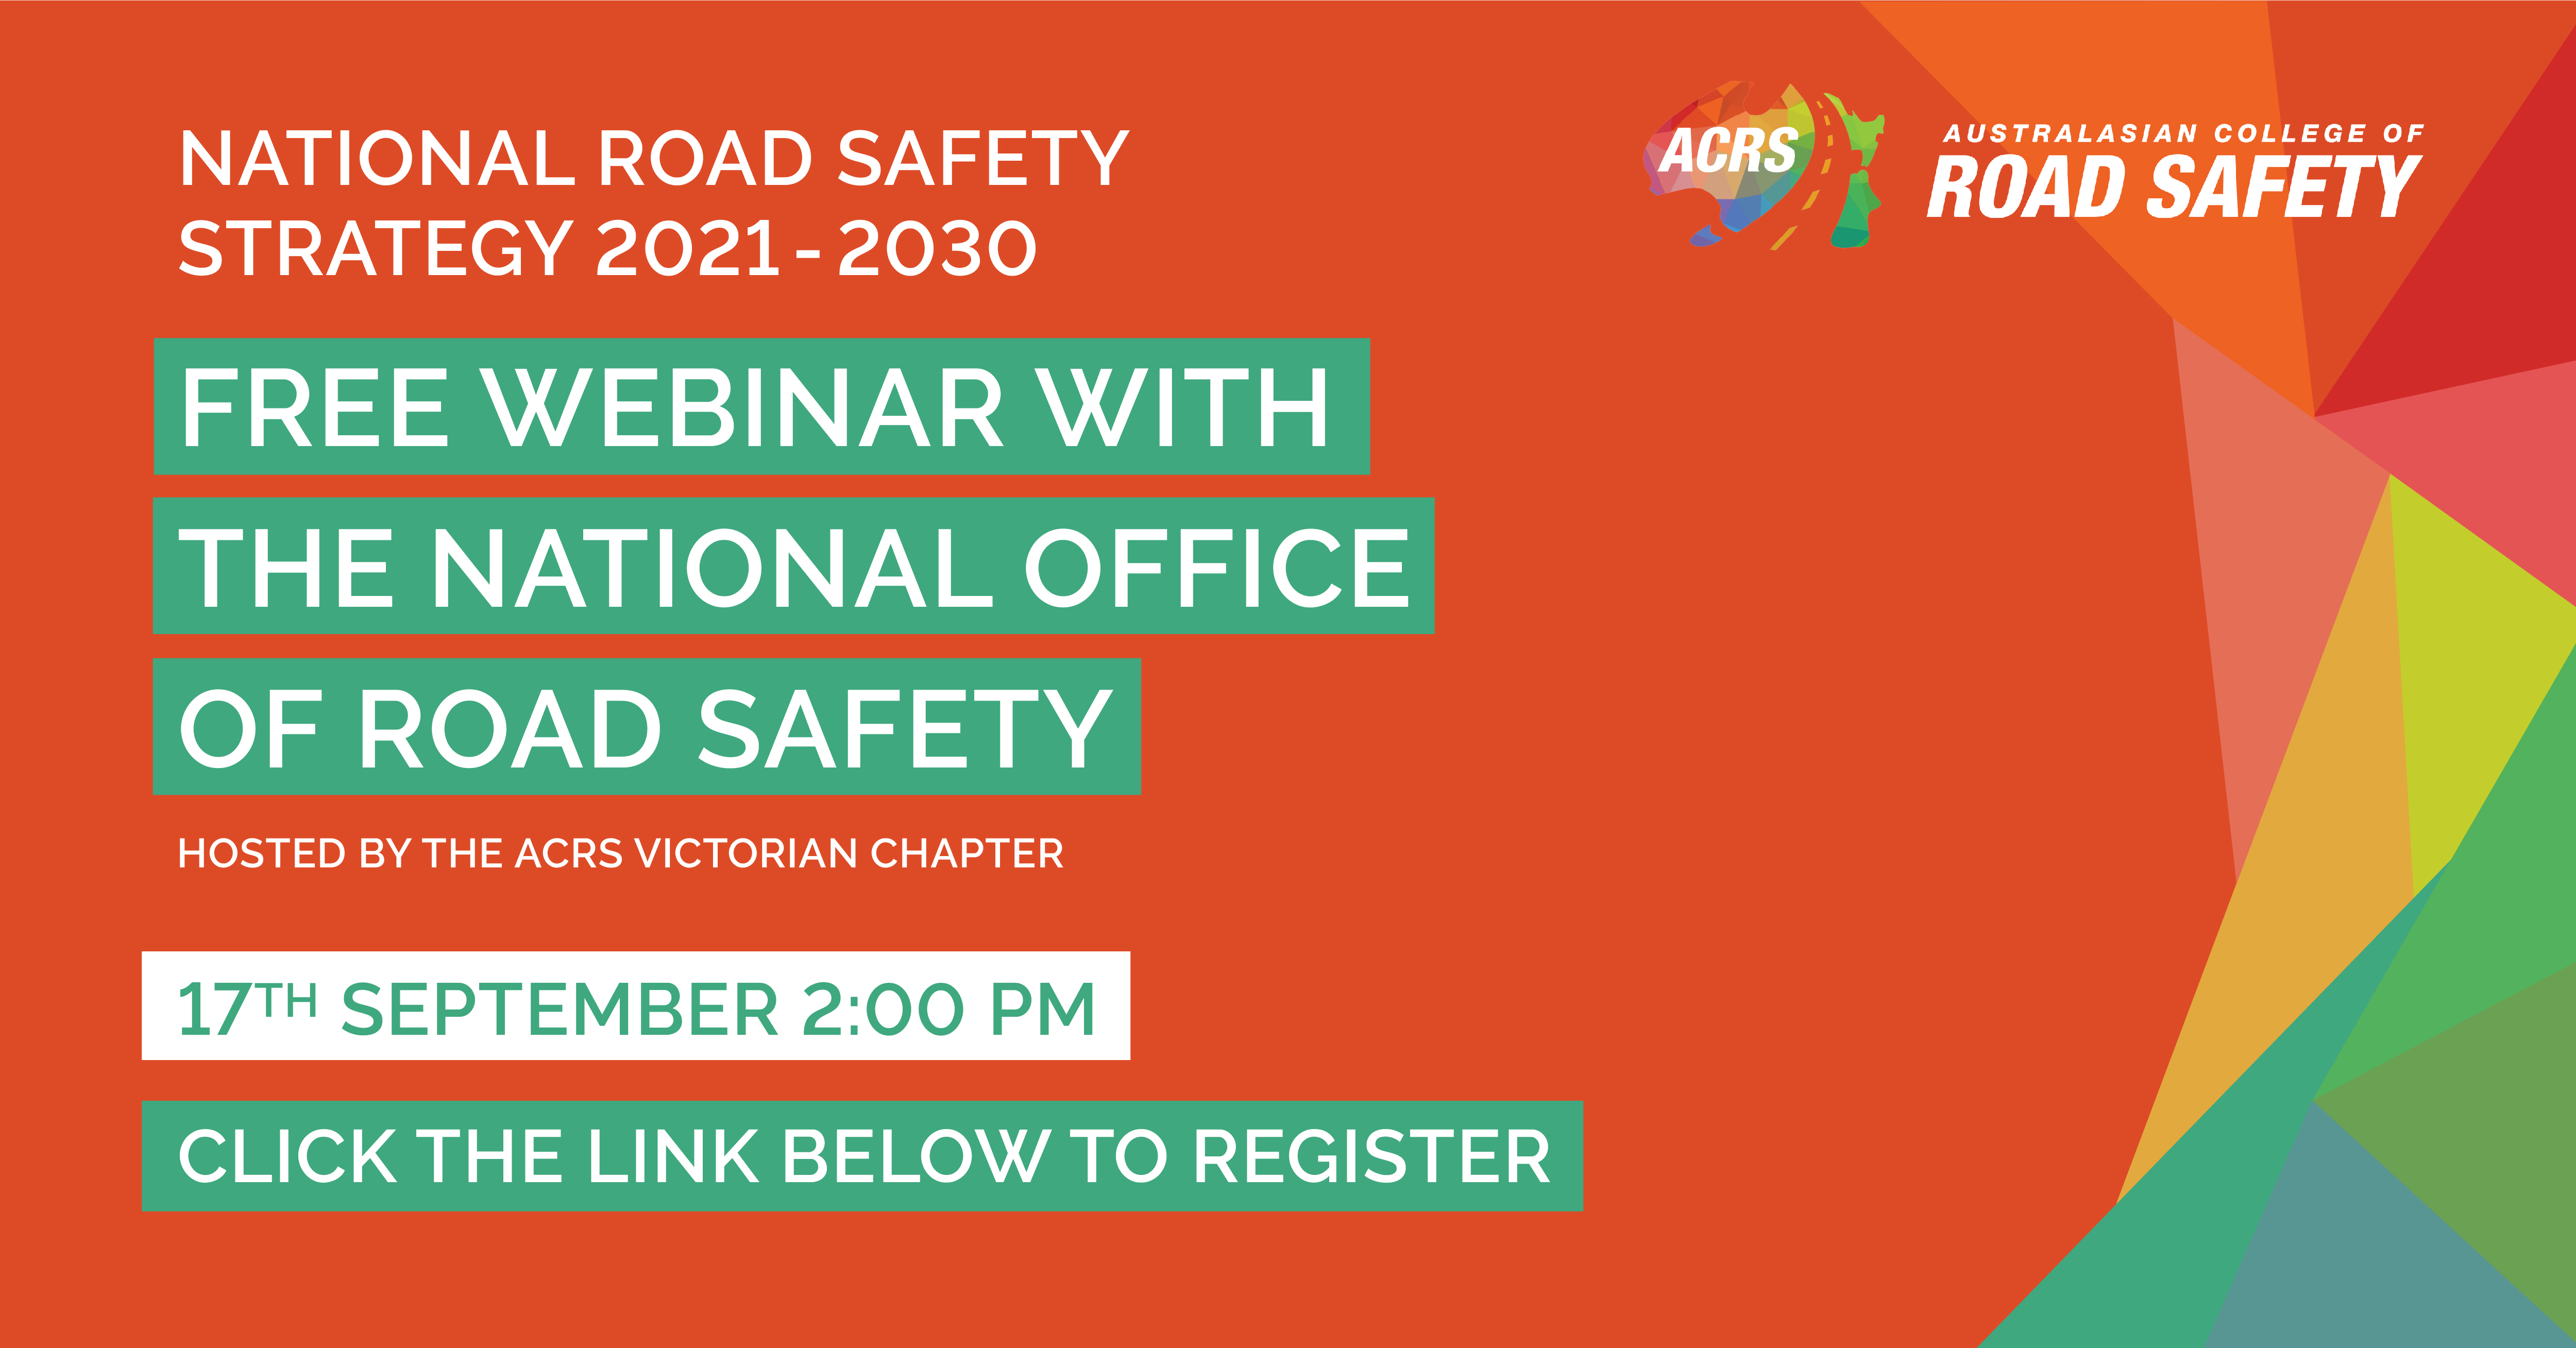 ACRS Webinar: The new National Road Safety Strategy 2021 to 2030 and the Social Model Approach